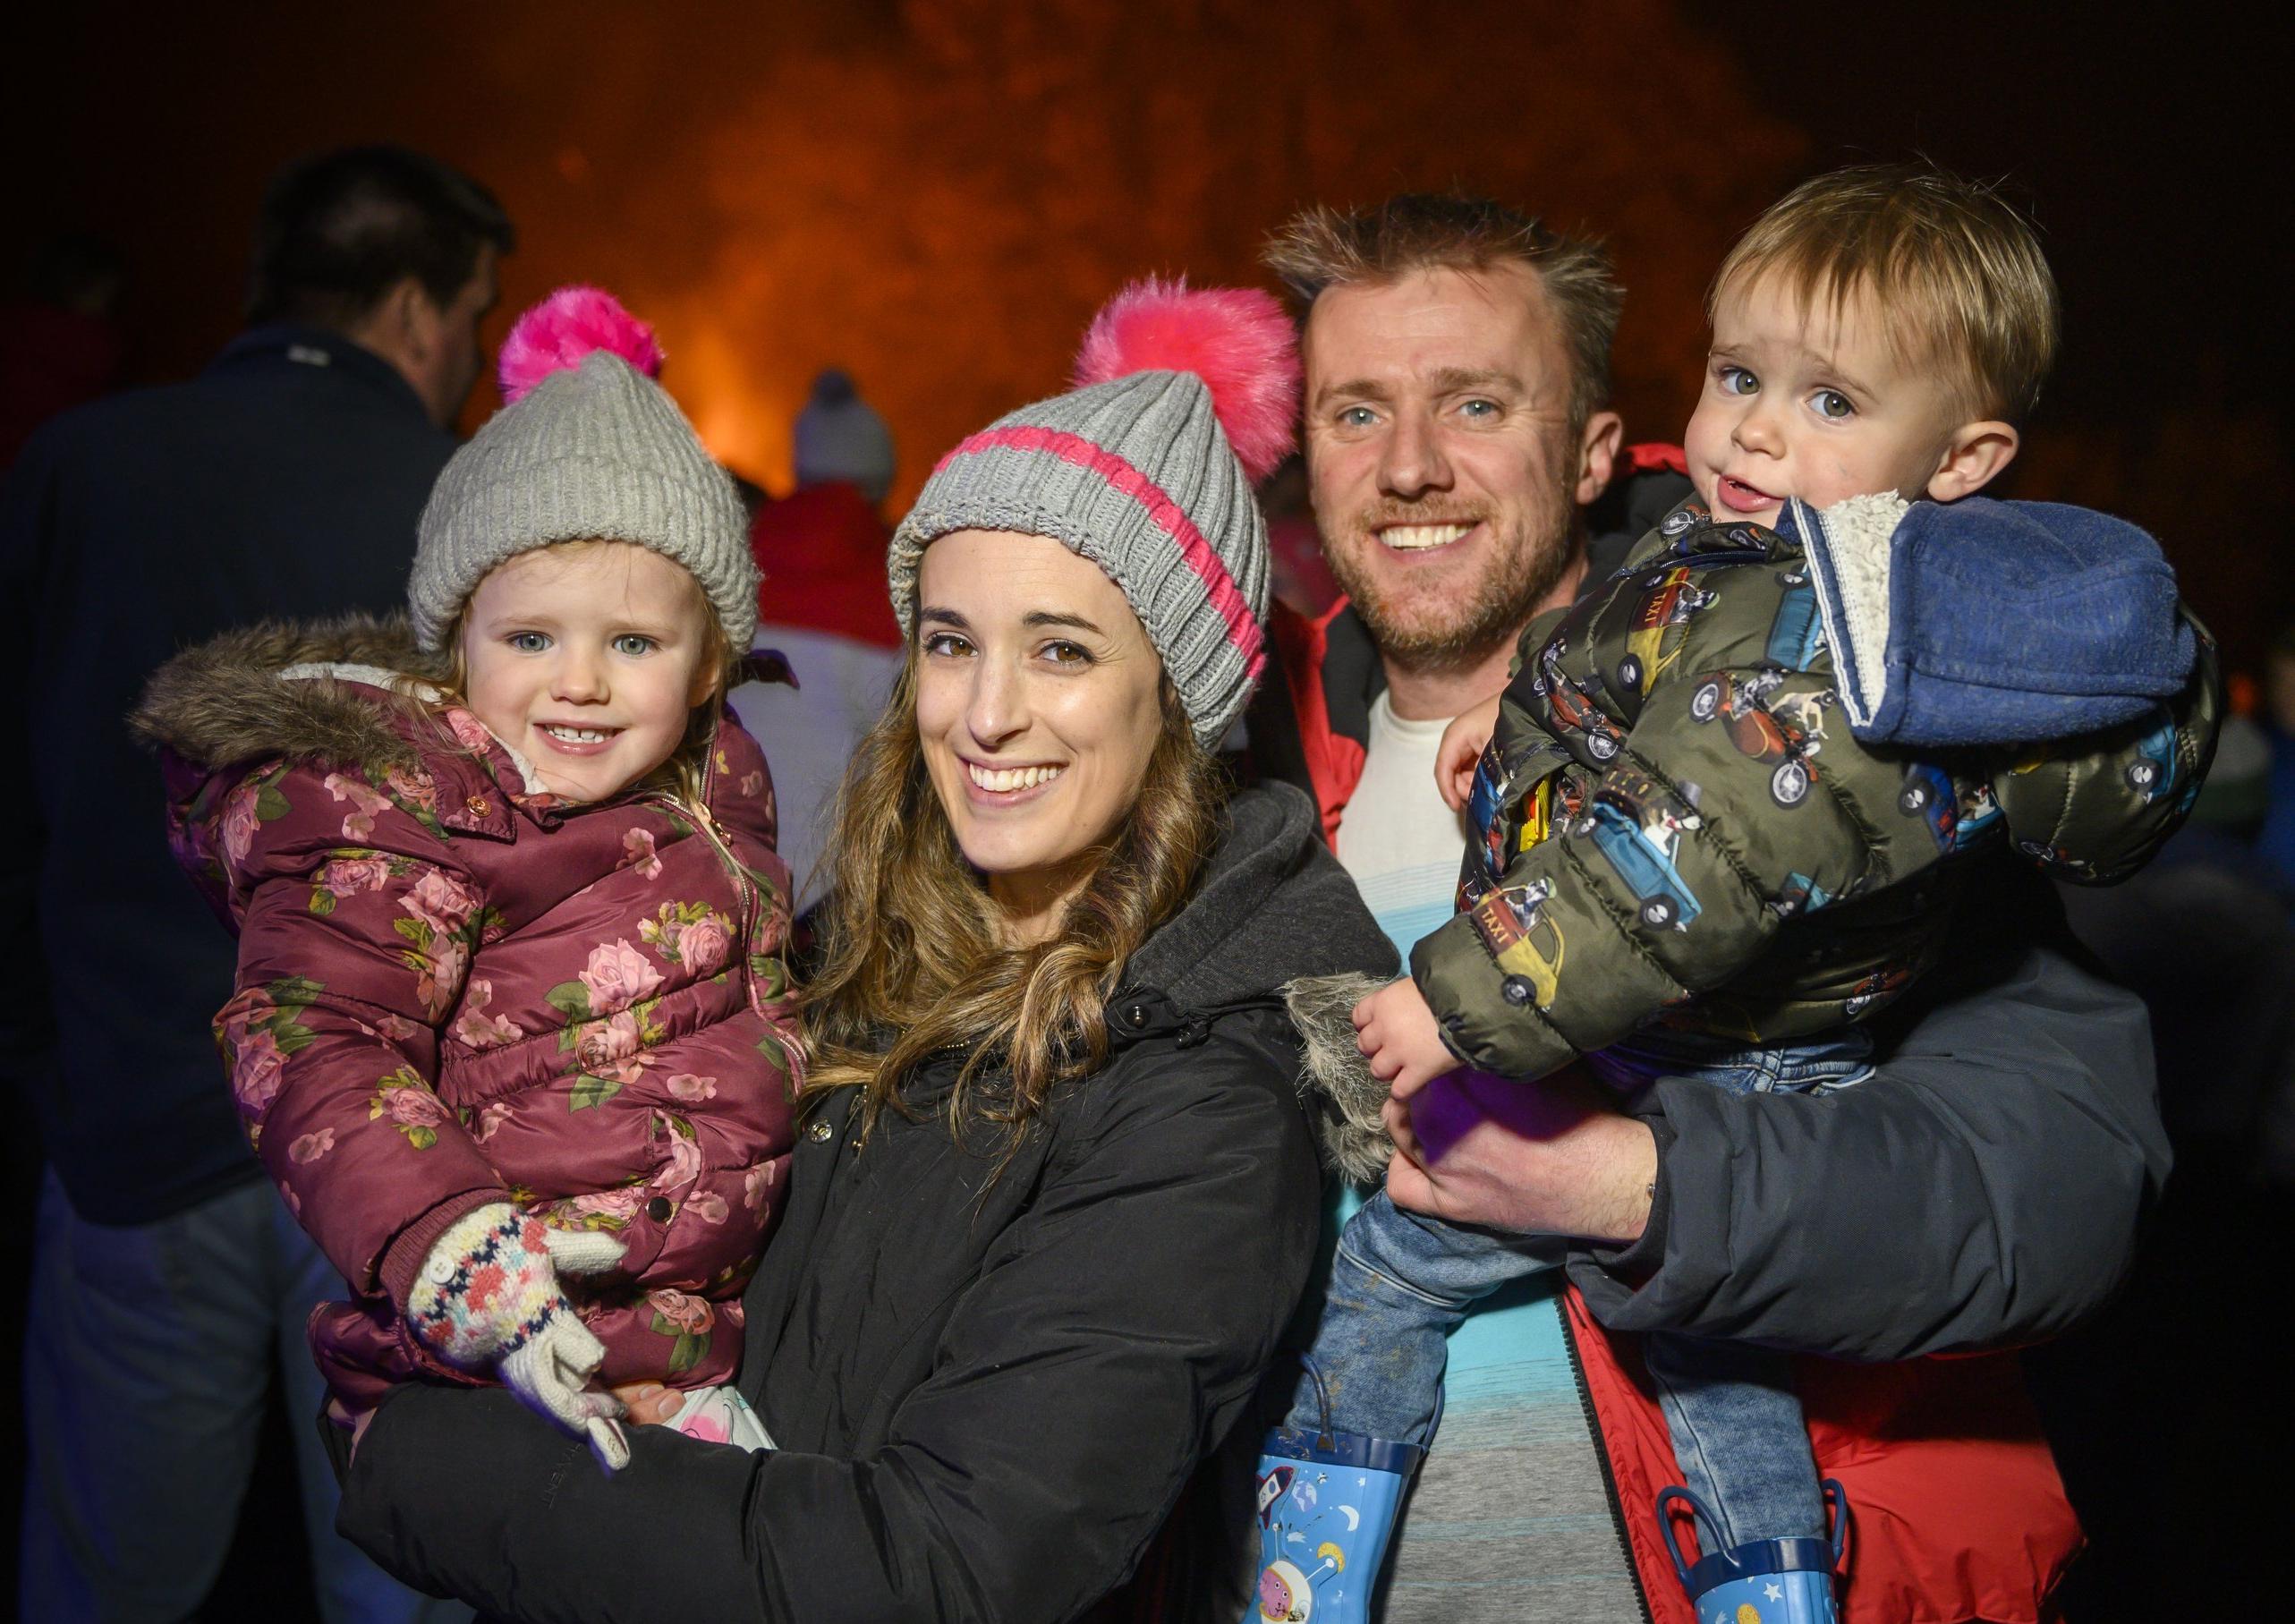 Lauder fireworks display 2019

Katy and Steven Harkin with kids Rhian and Max

Pic Phil Wilkinson 
info@philspix.com